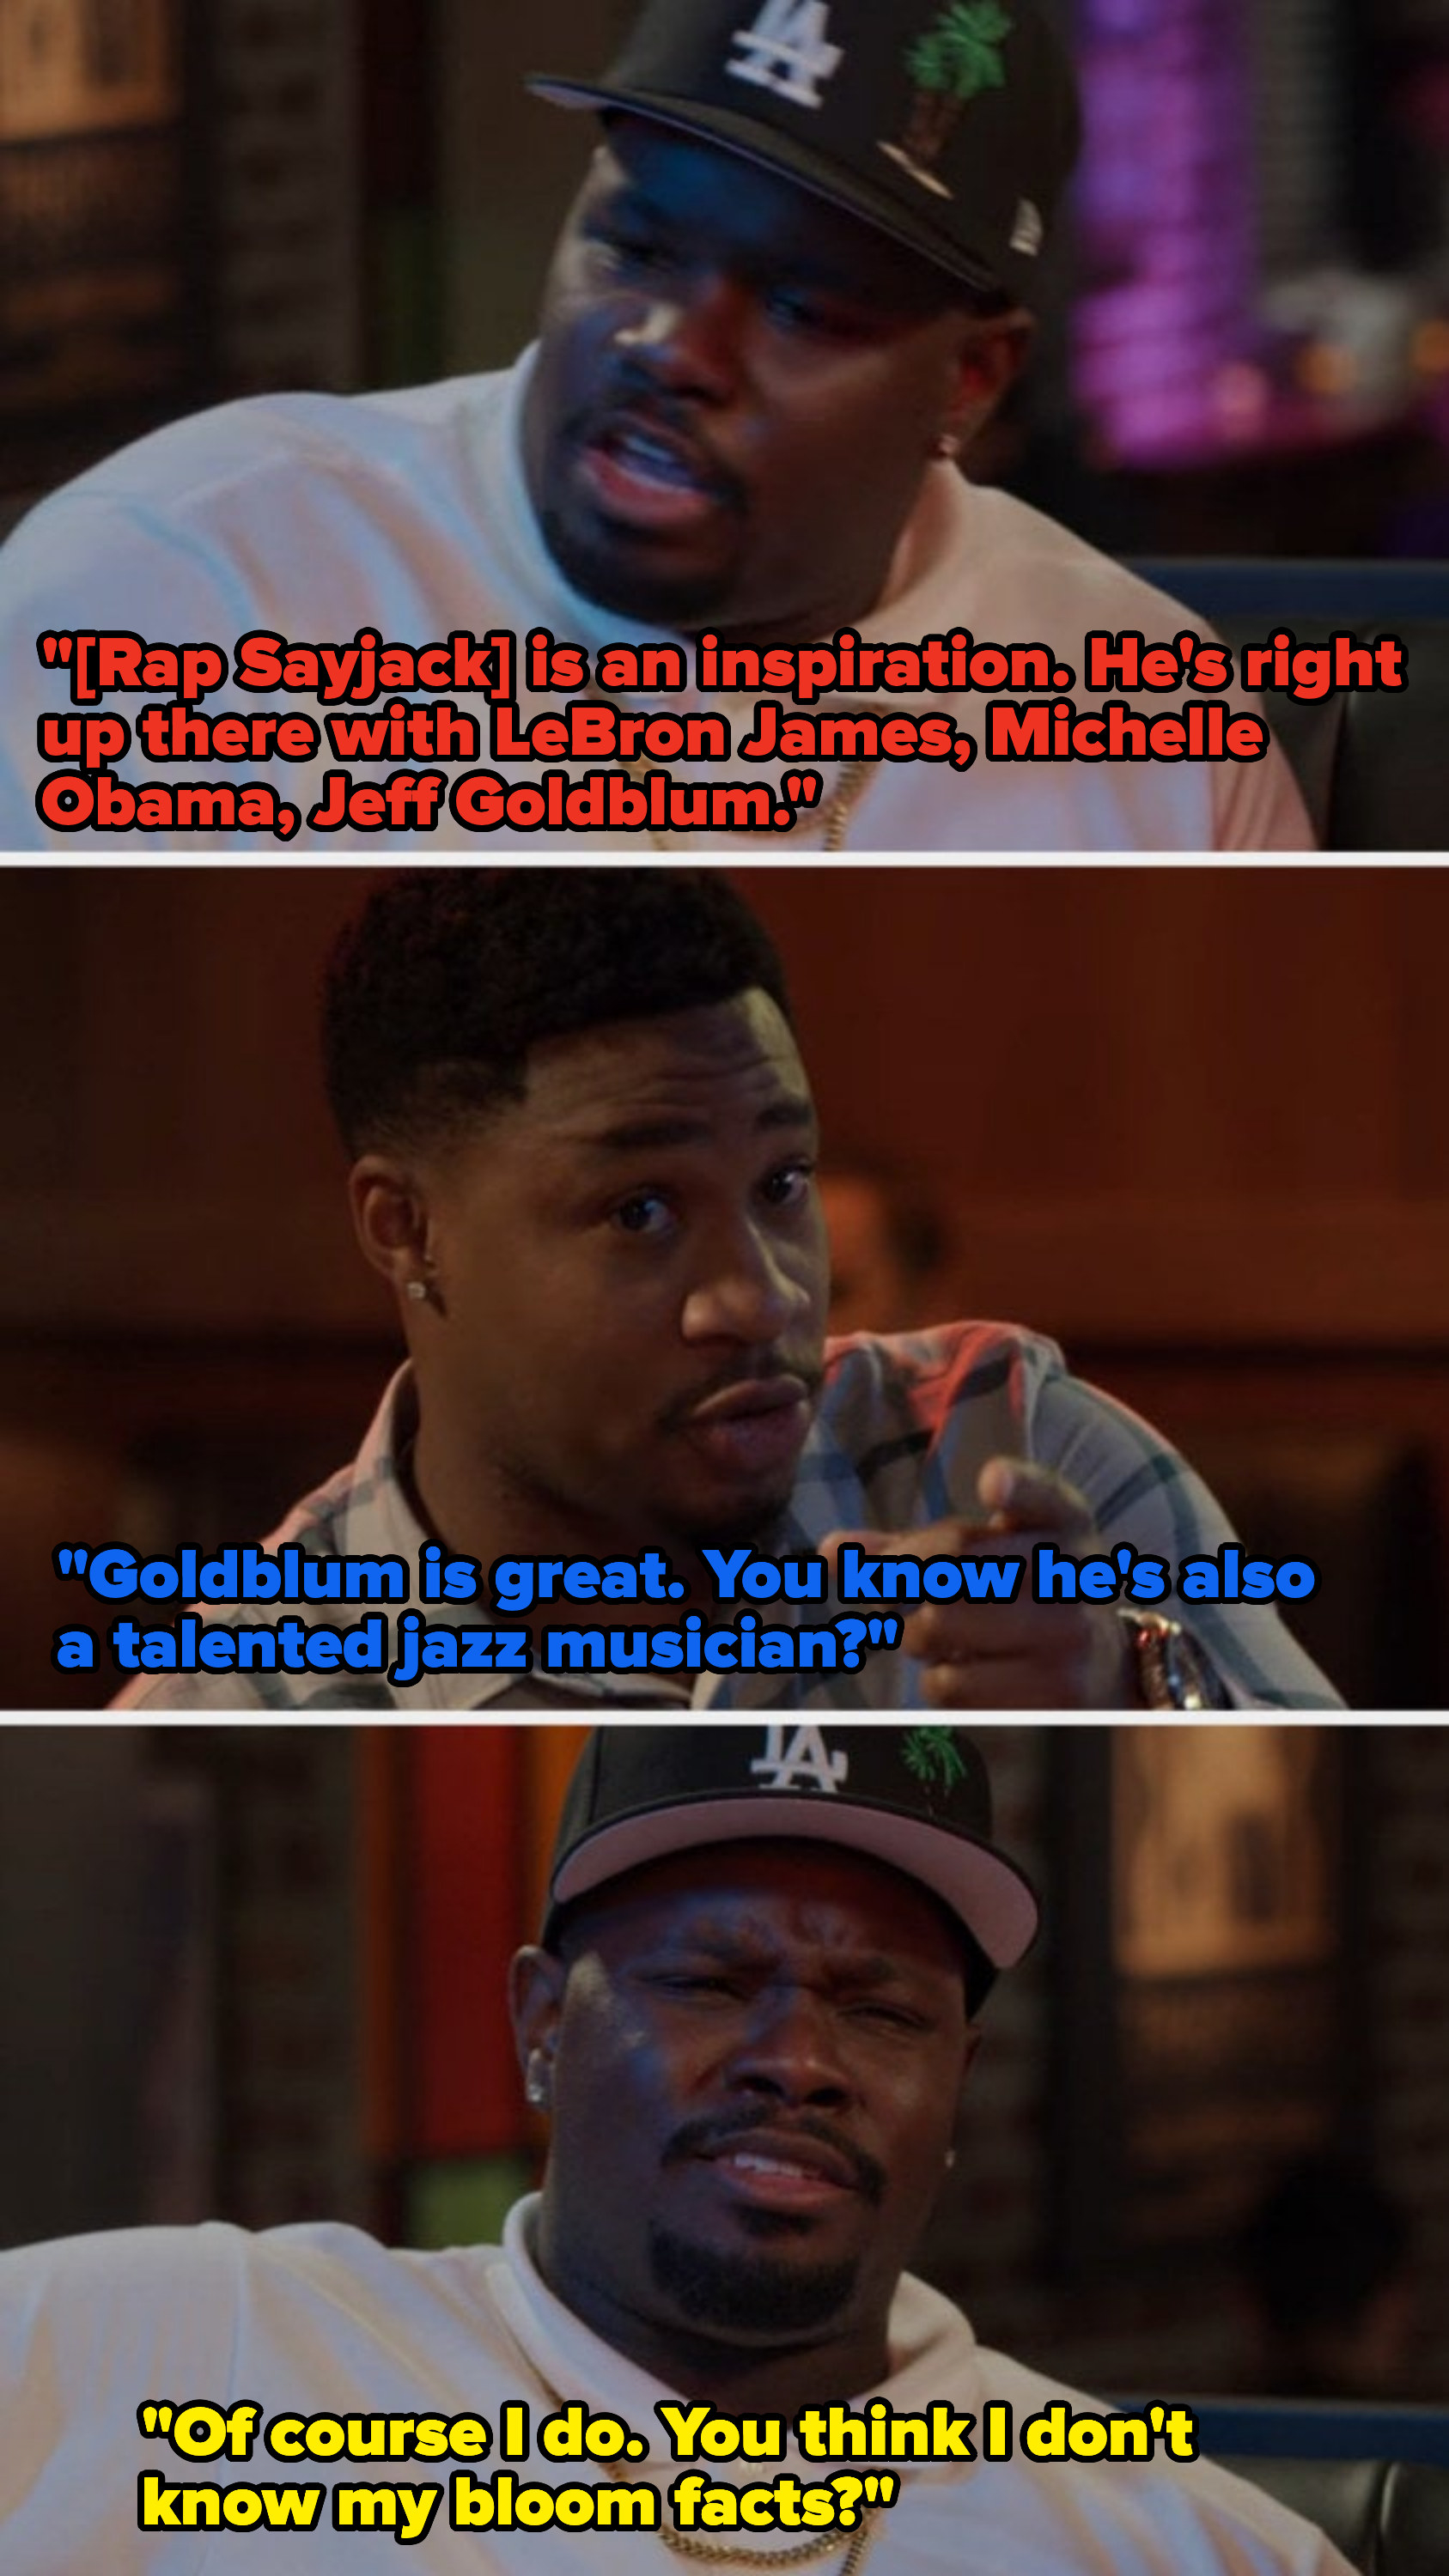 Sherm praises Rap Sayjack while making it clear that he knows his Jeff Goldblum facts